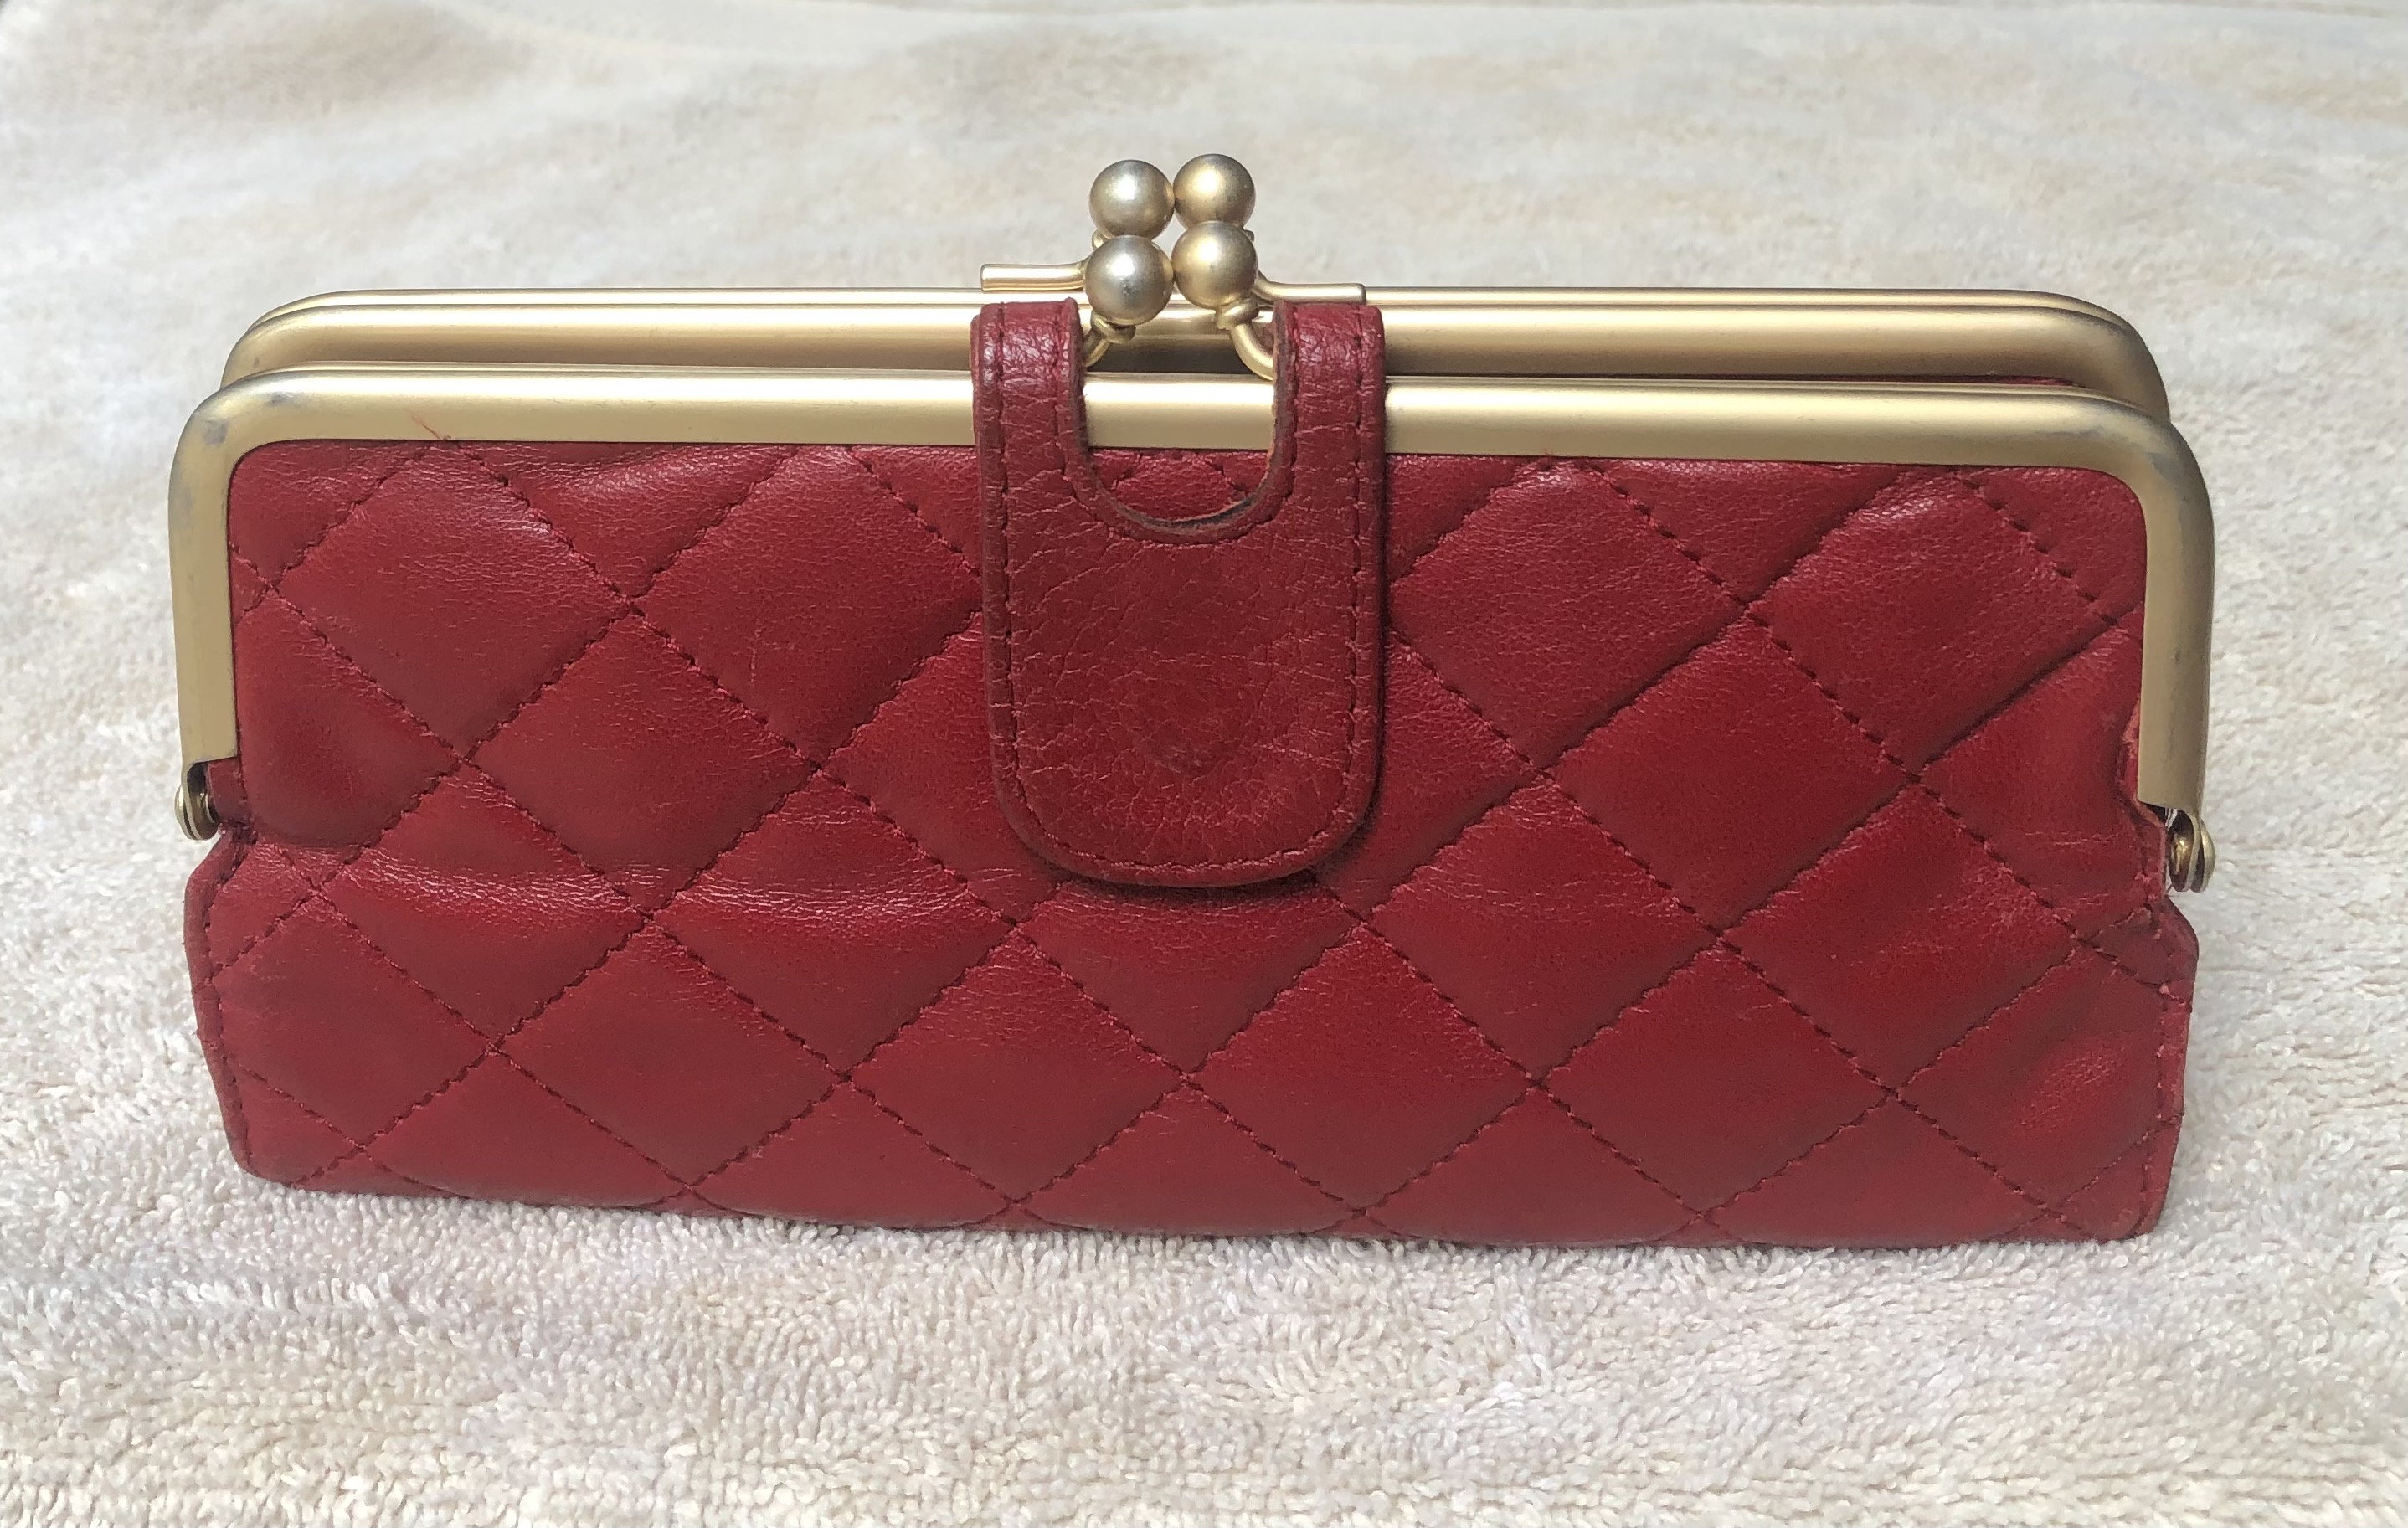 Vintage Quilted Leather Wallet - Danier - Double Kiss Lock Purse - Diamond Quilting